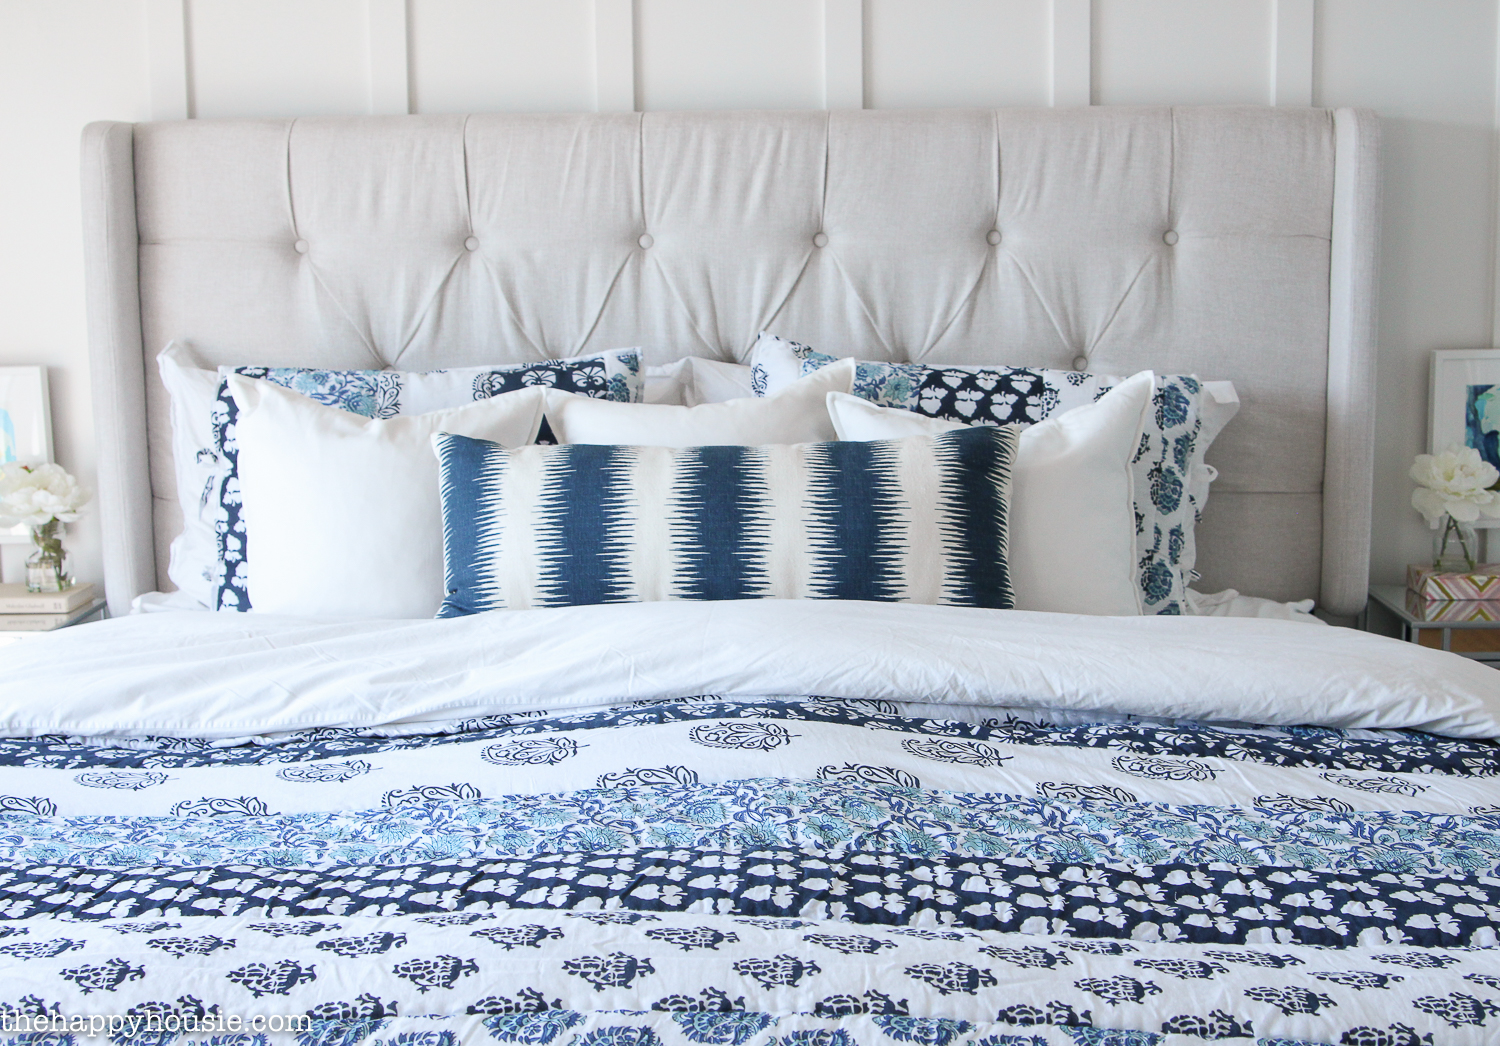 A cozy quilt on a king sized bed with a tufted white headboard.